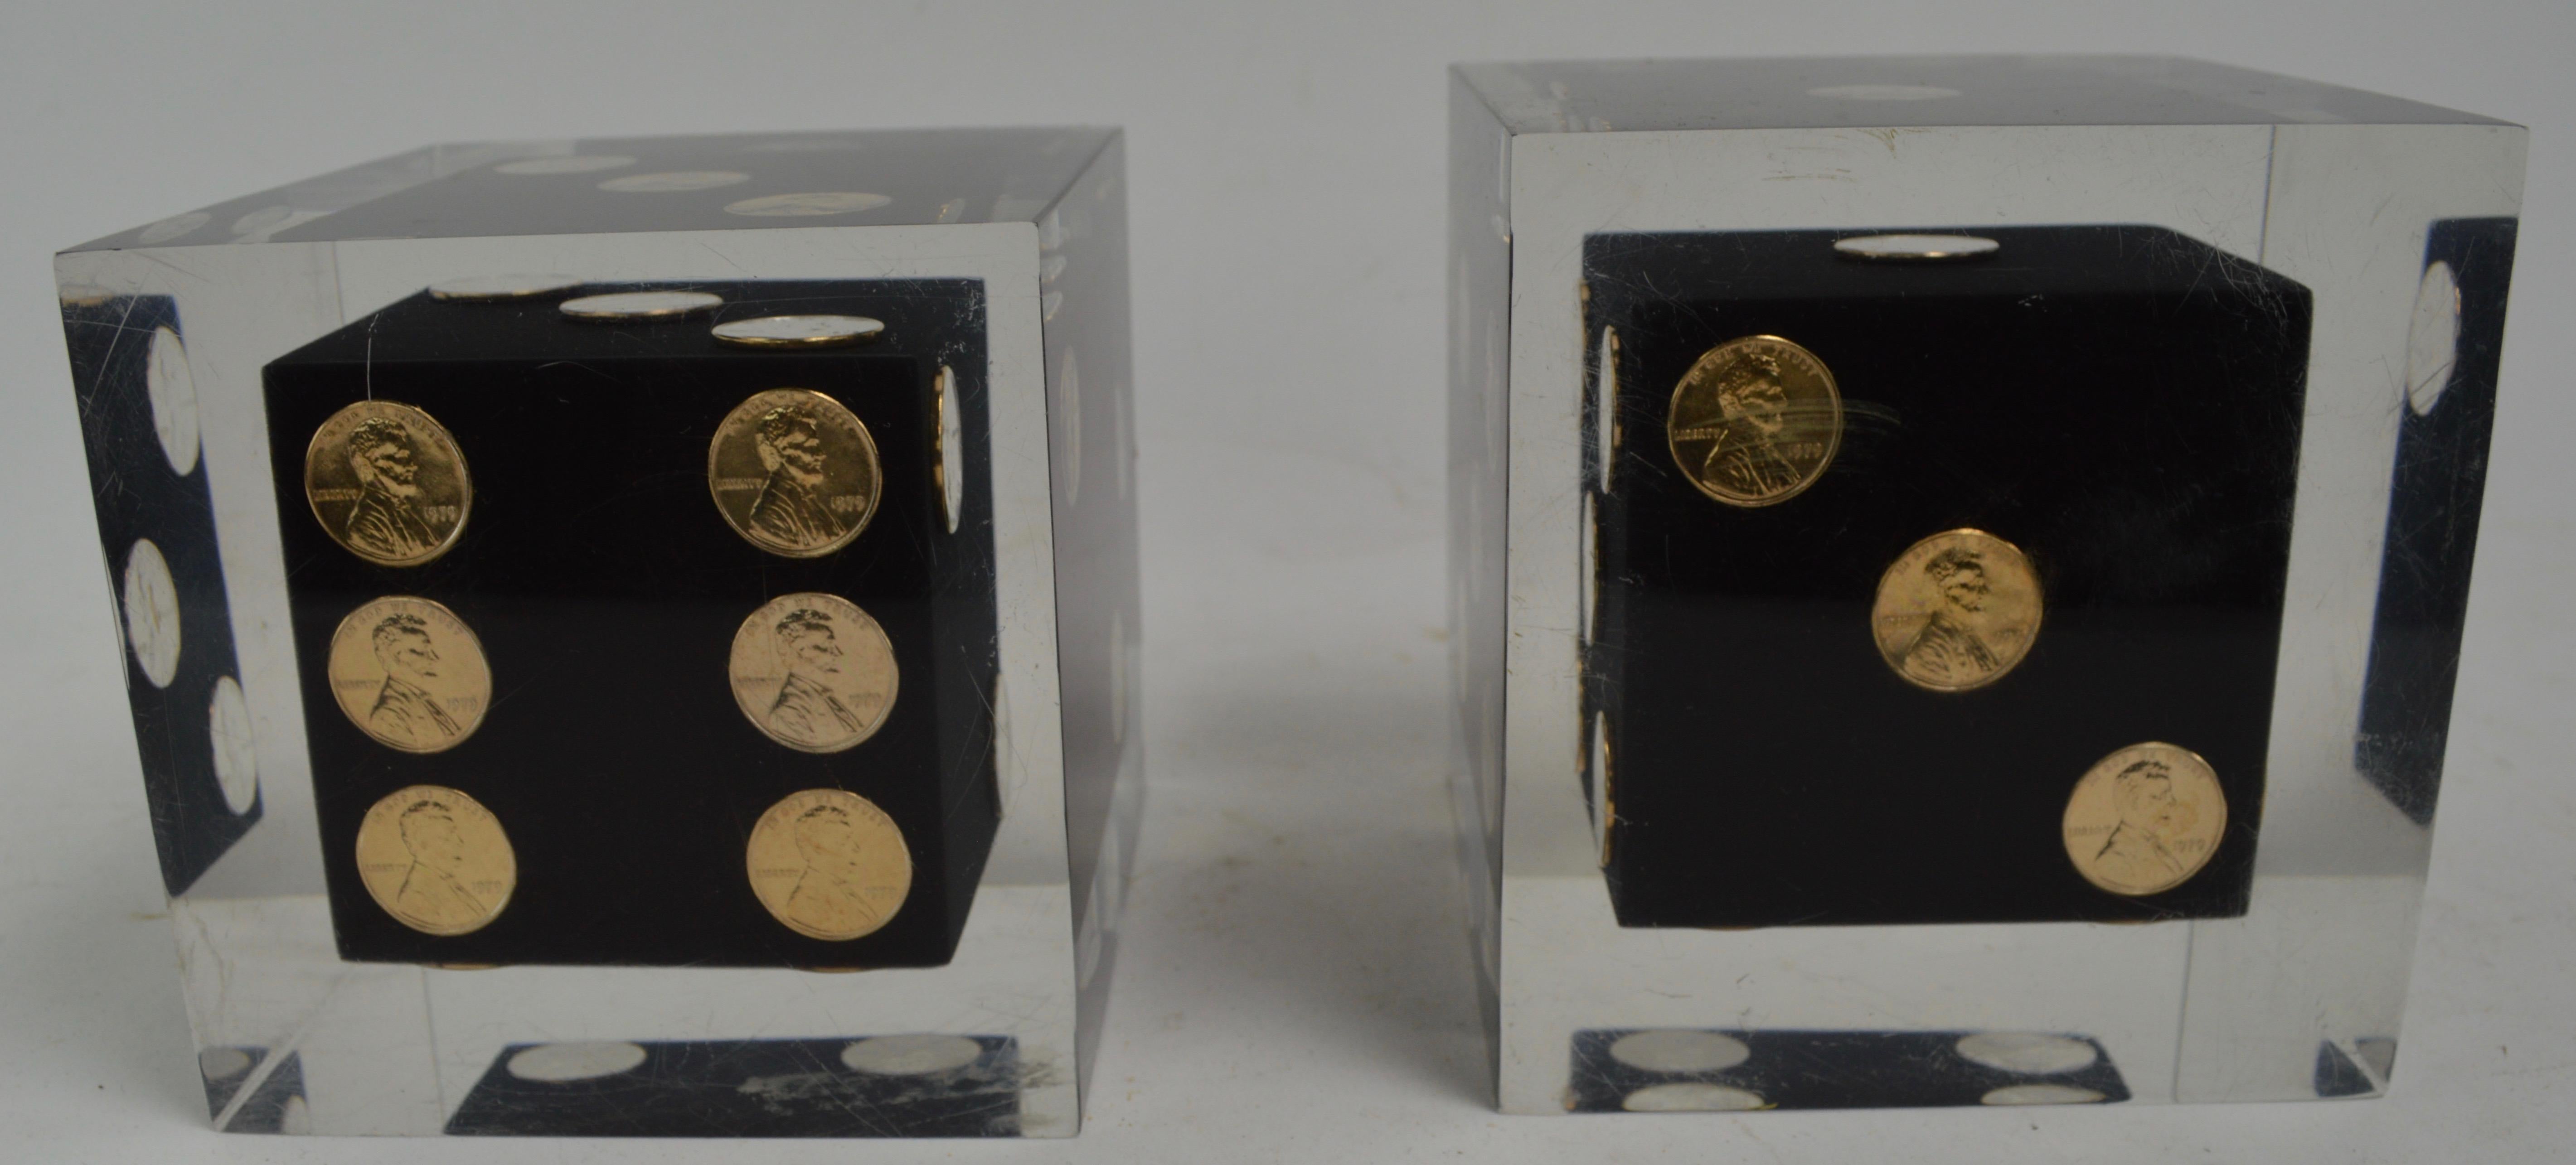 American Pair of Cast Lucite Dice Cubes with Copper Pennies